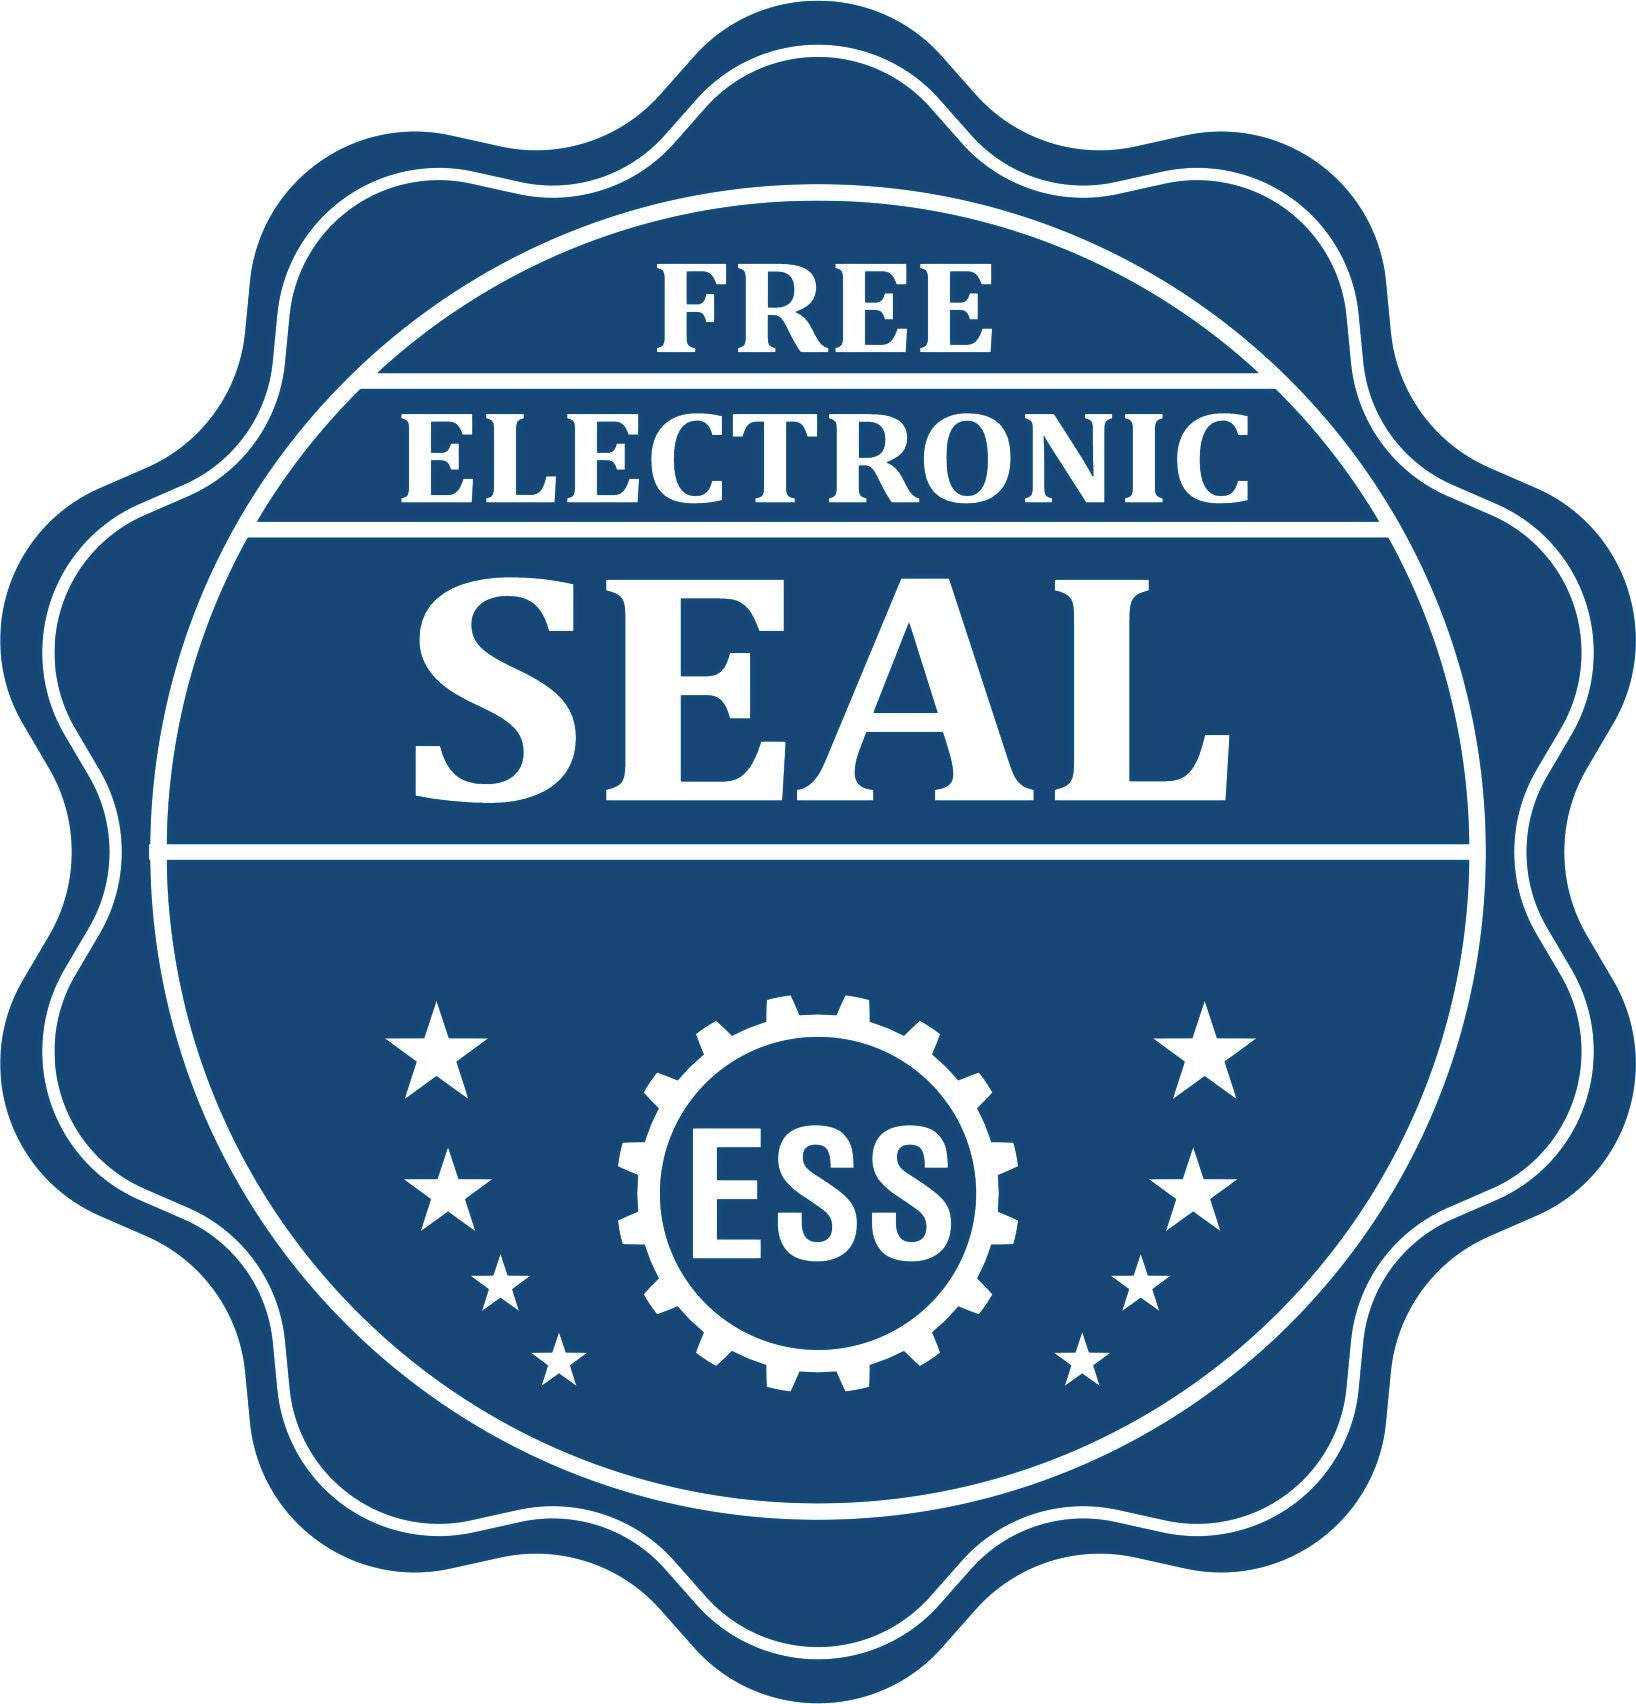 A badge showing a free electronic seal for the State of Montana Extended Long Reach Engineer Seal with stars and the ESS gear on the emblem.